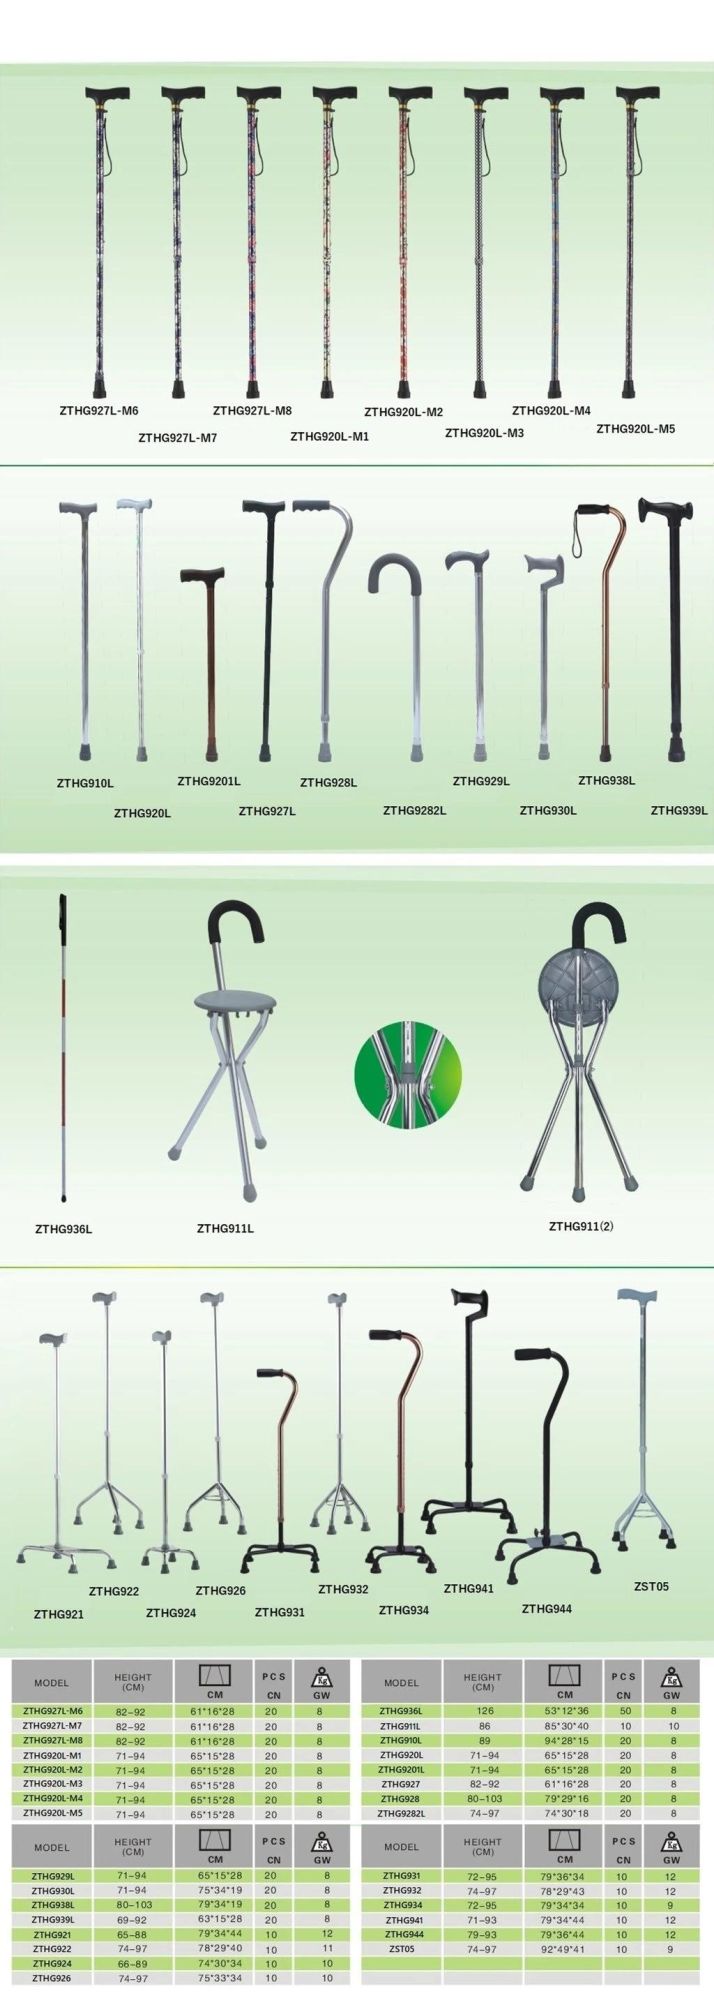 Foldable Scalable Folding Walking Stick with Seat Antiskid Portable Disabled/Elderly People Safety Outdoor Lightweight Steel Easy Carry Crutch